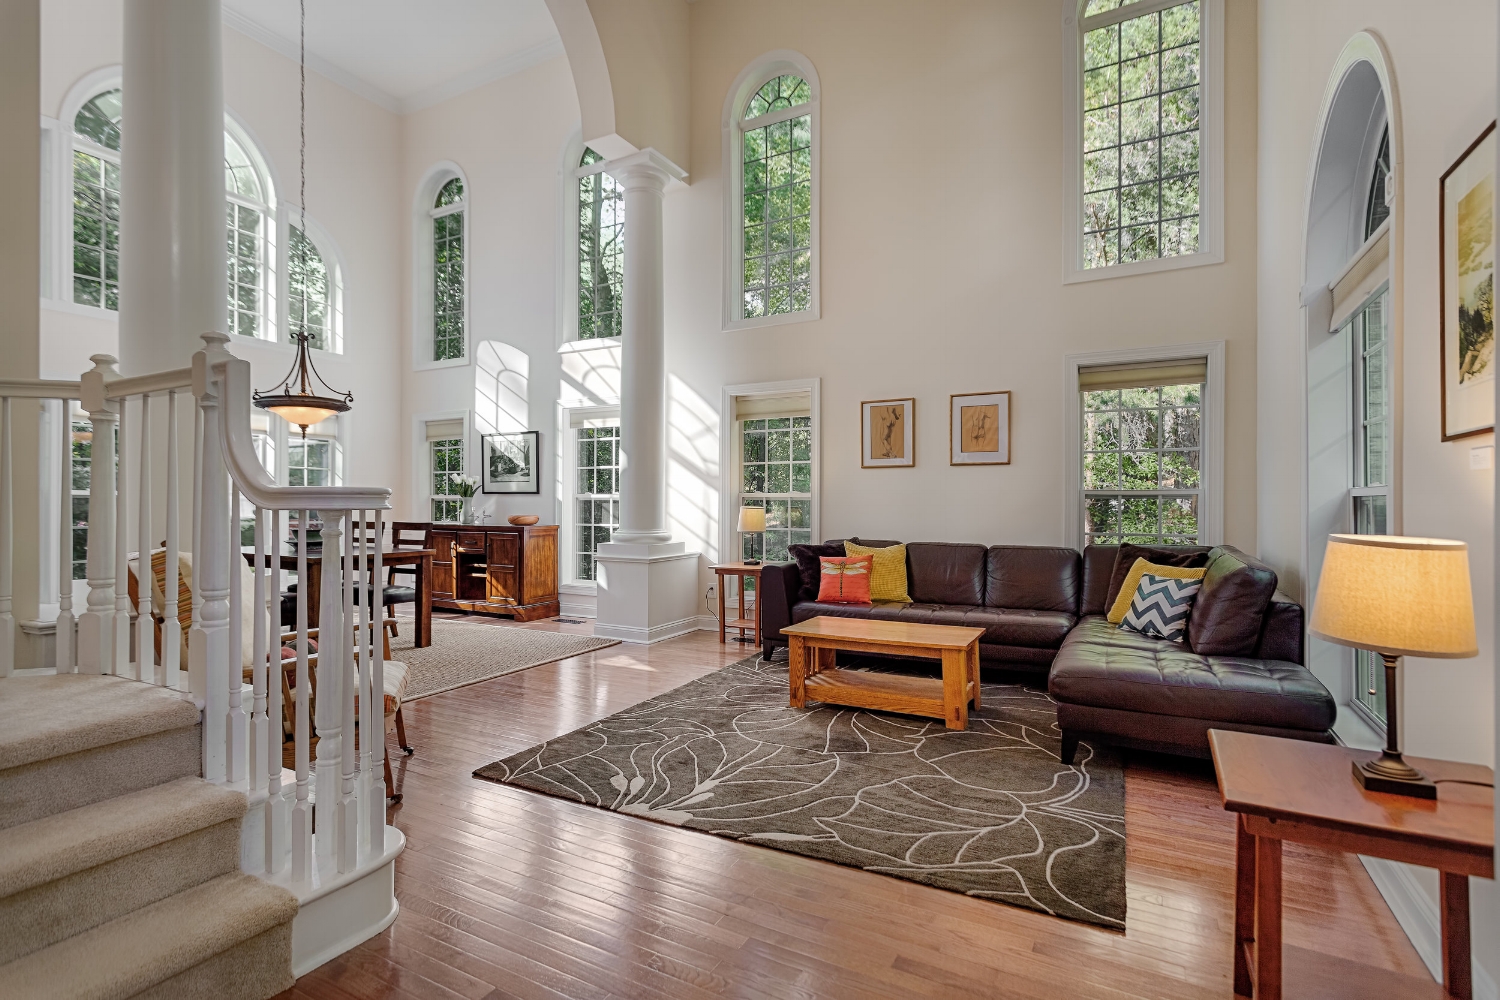 Open room with tall ceilings